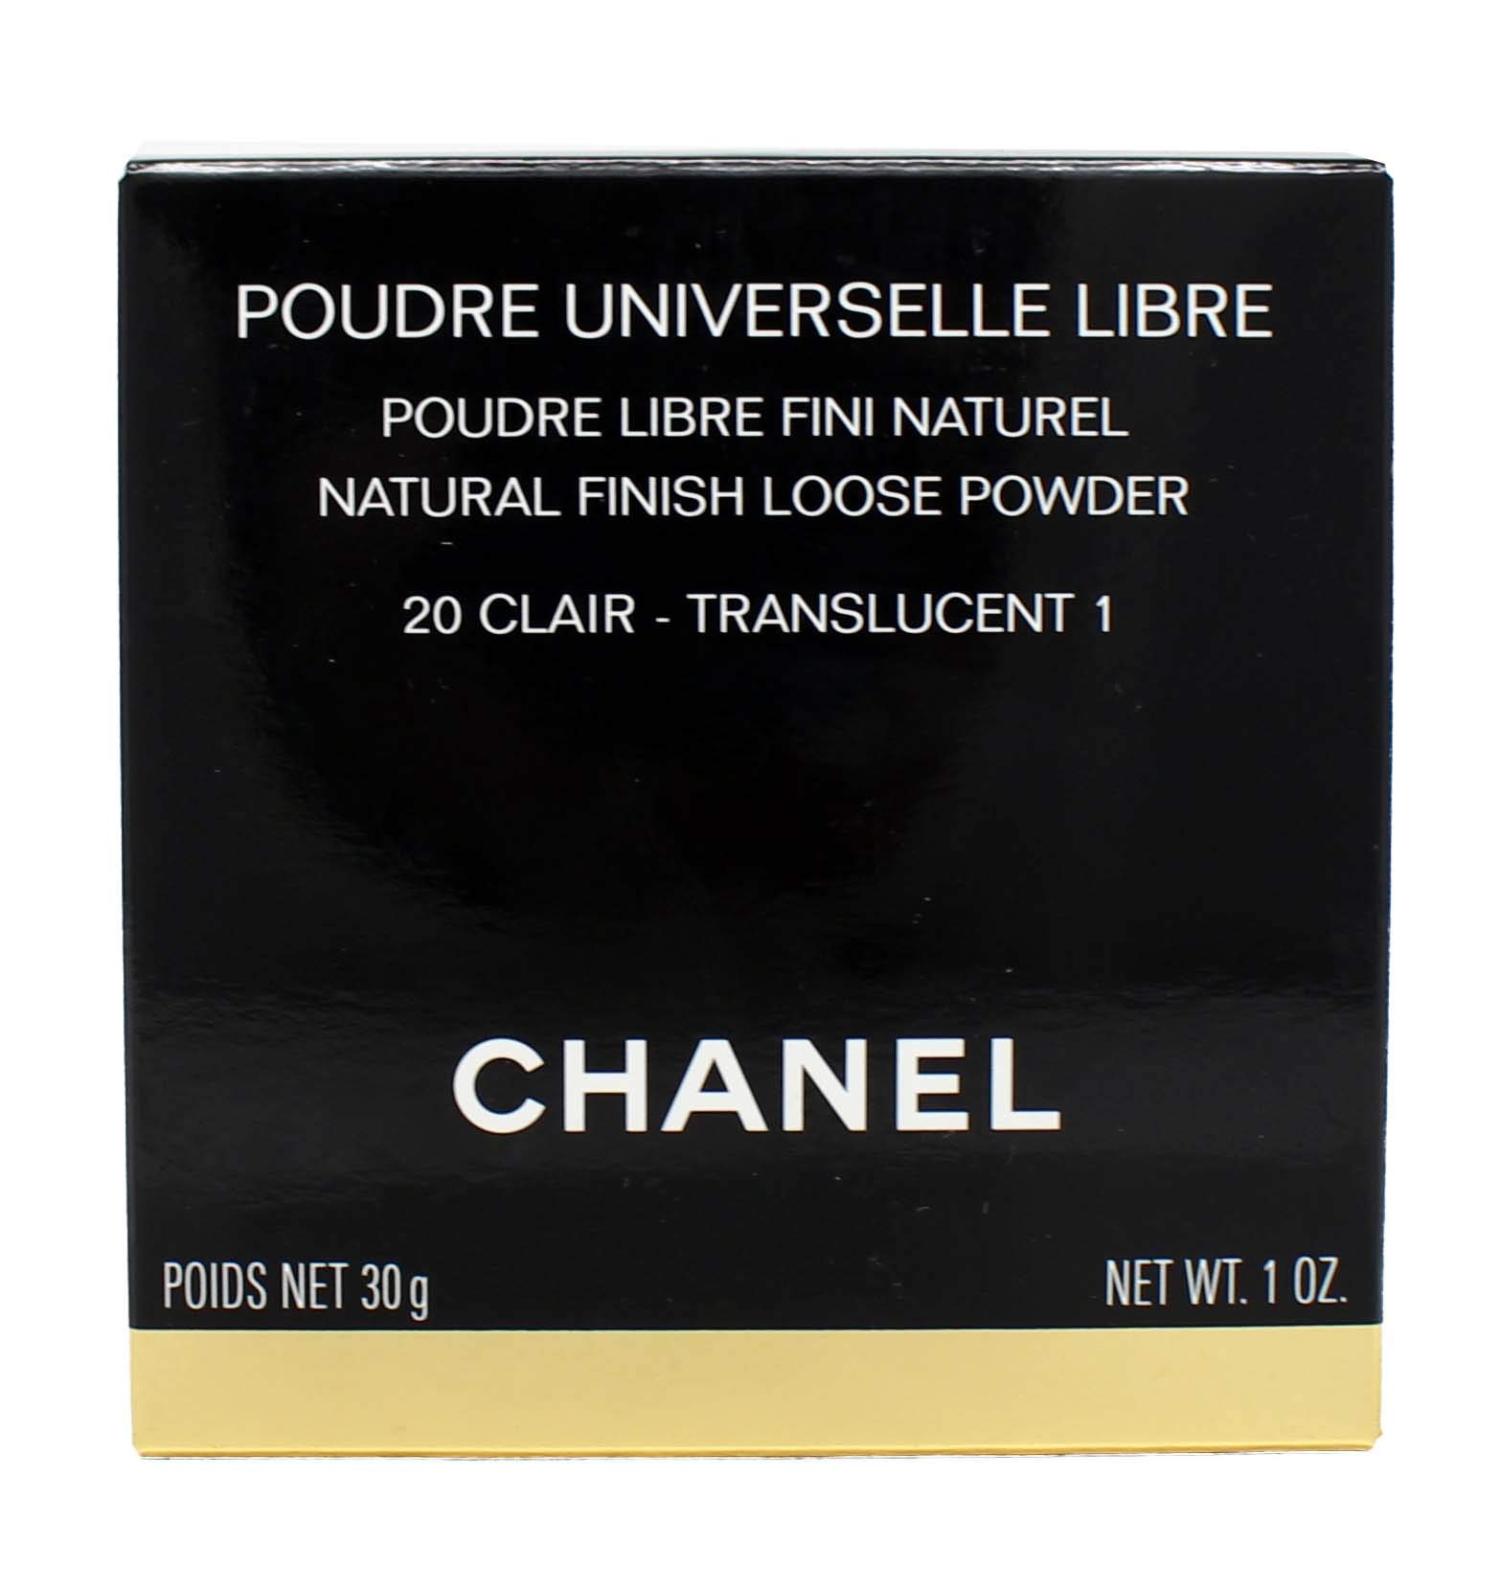 Unsung Heroes: Chanel Poudres Universelle Libre Natural Finish Loose Powder  - Makeup and Beauty Blog